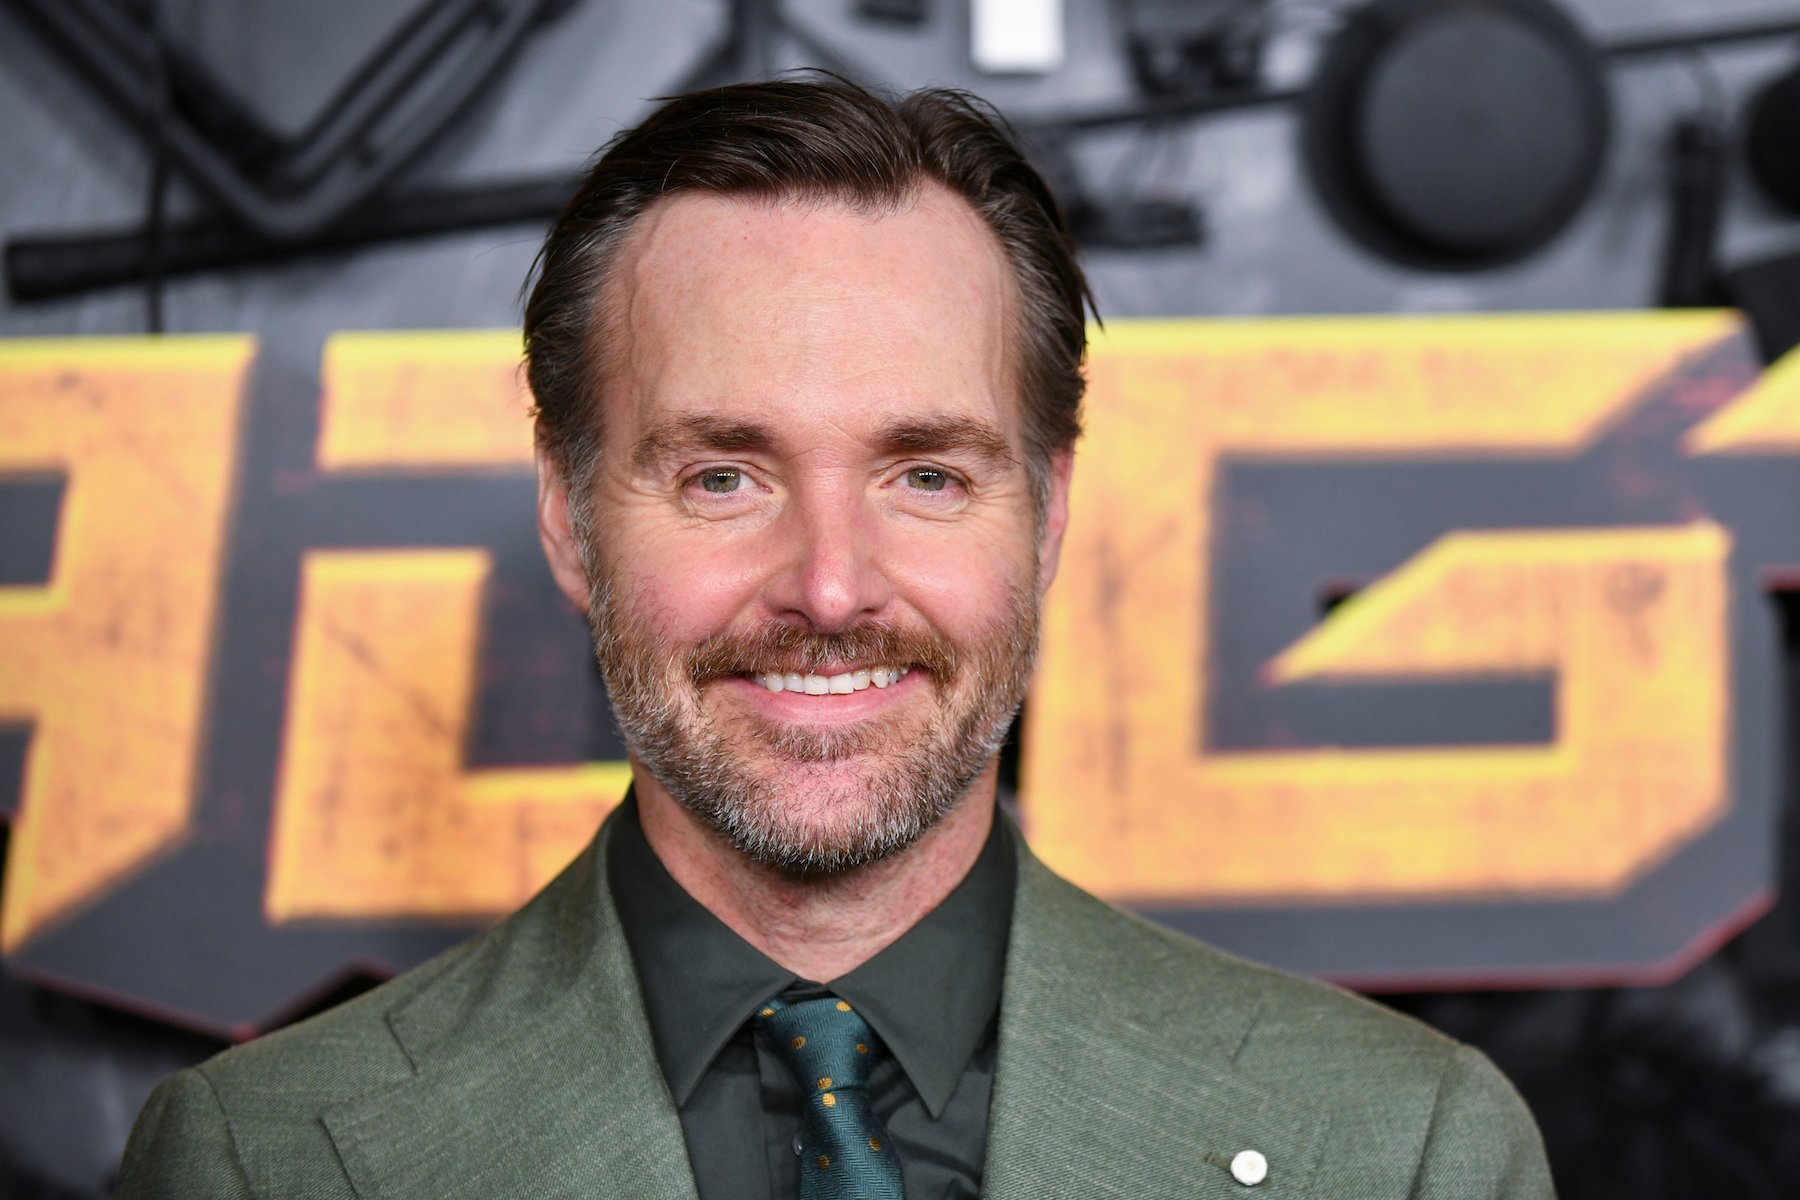 Will Forte attends the red carpet premiere party for Peacock's new comedy series "MacGruber" at California Science Center on December 08, 2021 in Los Angeles.